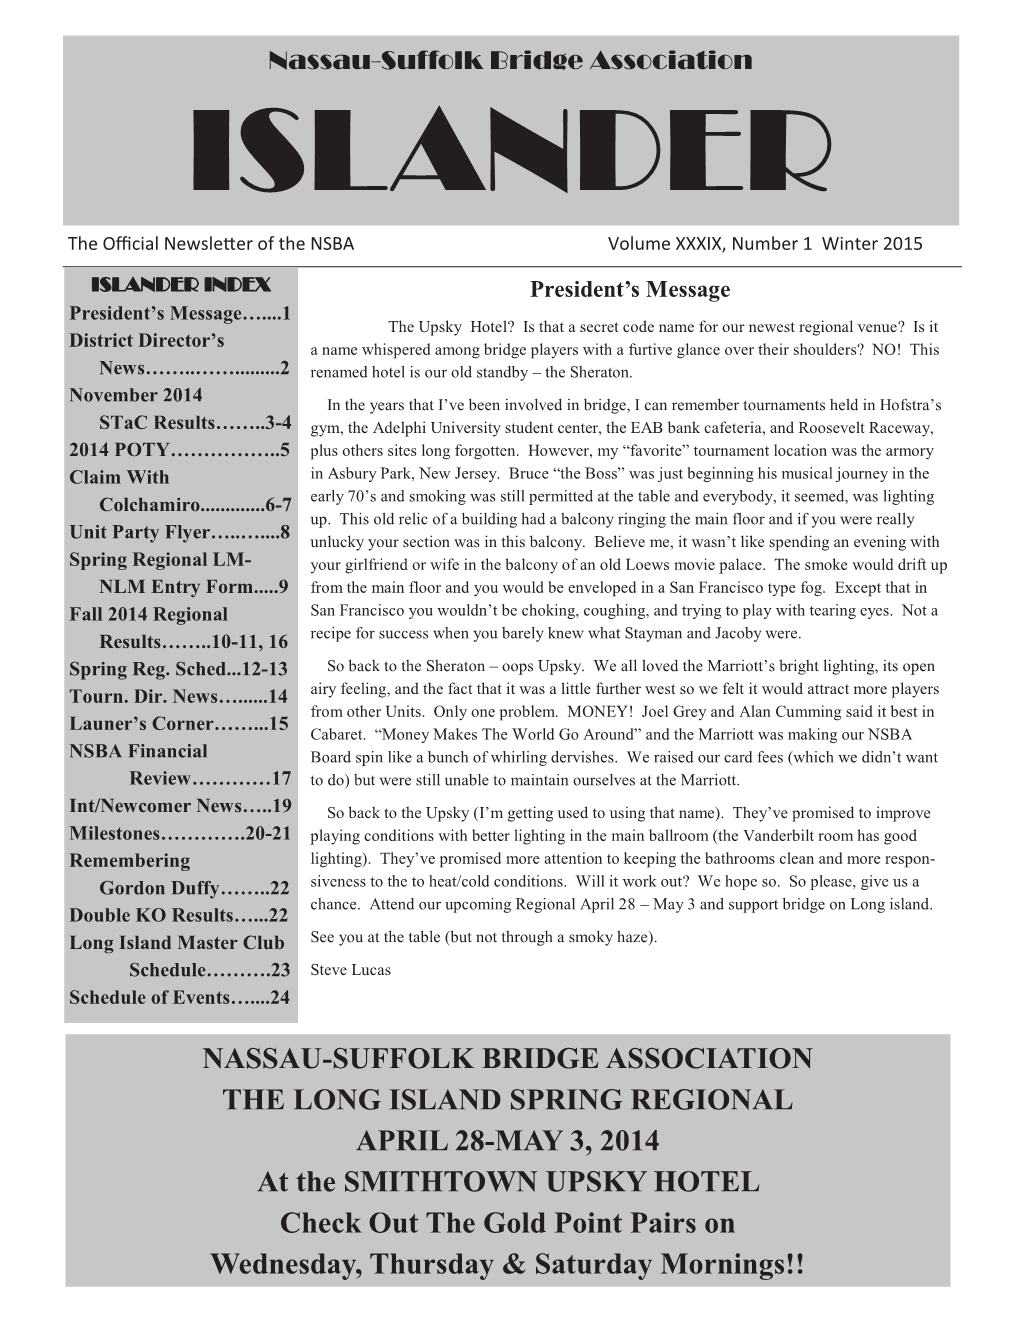 NASSAU-SUFFOLK BRIDGE ASSOCIATION the LONG ISLAND SPRING REGIONAL APRIL 28-MAY 3, 2014 at the SMITHTOWN UPSKY HOTEL Check out the Gold Point Pairs On